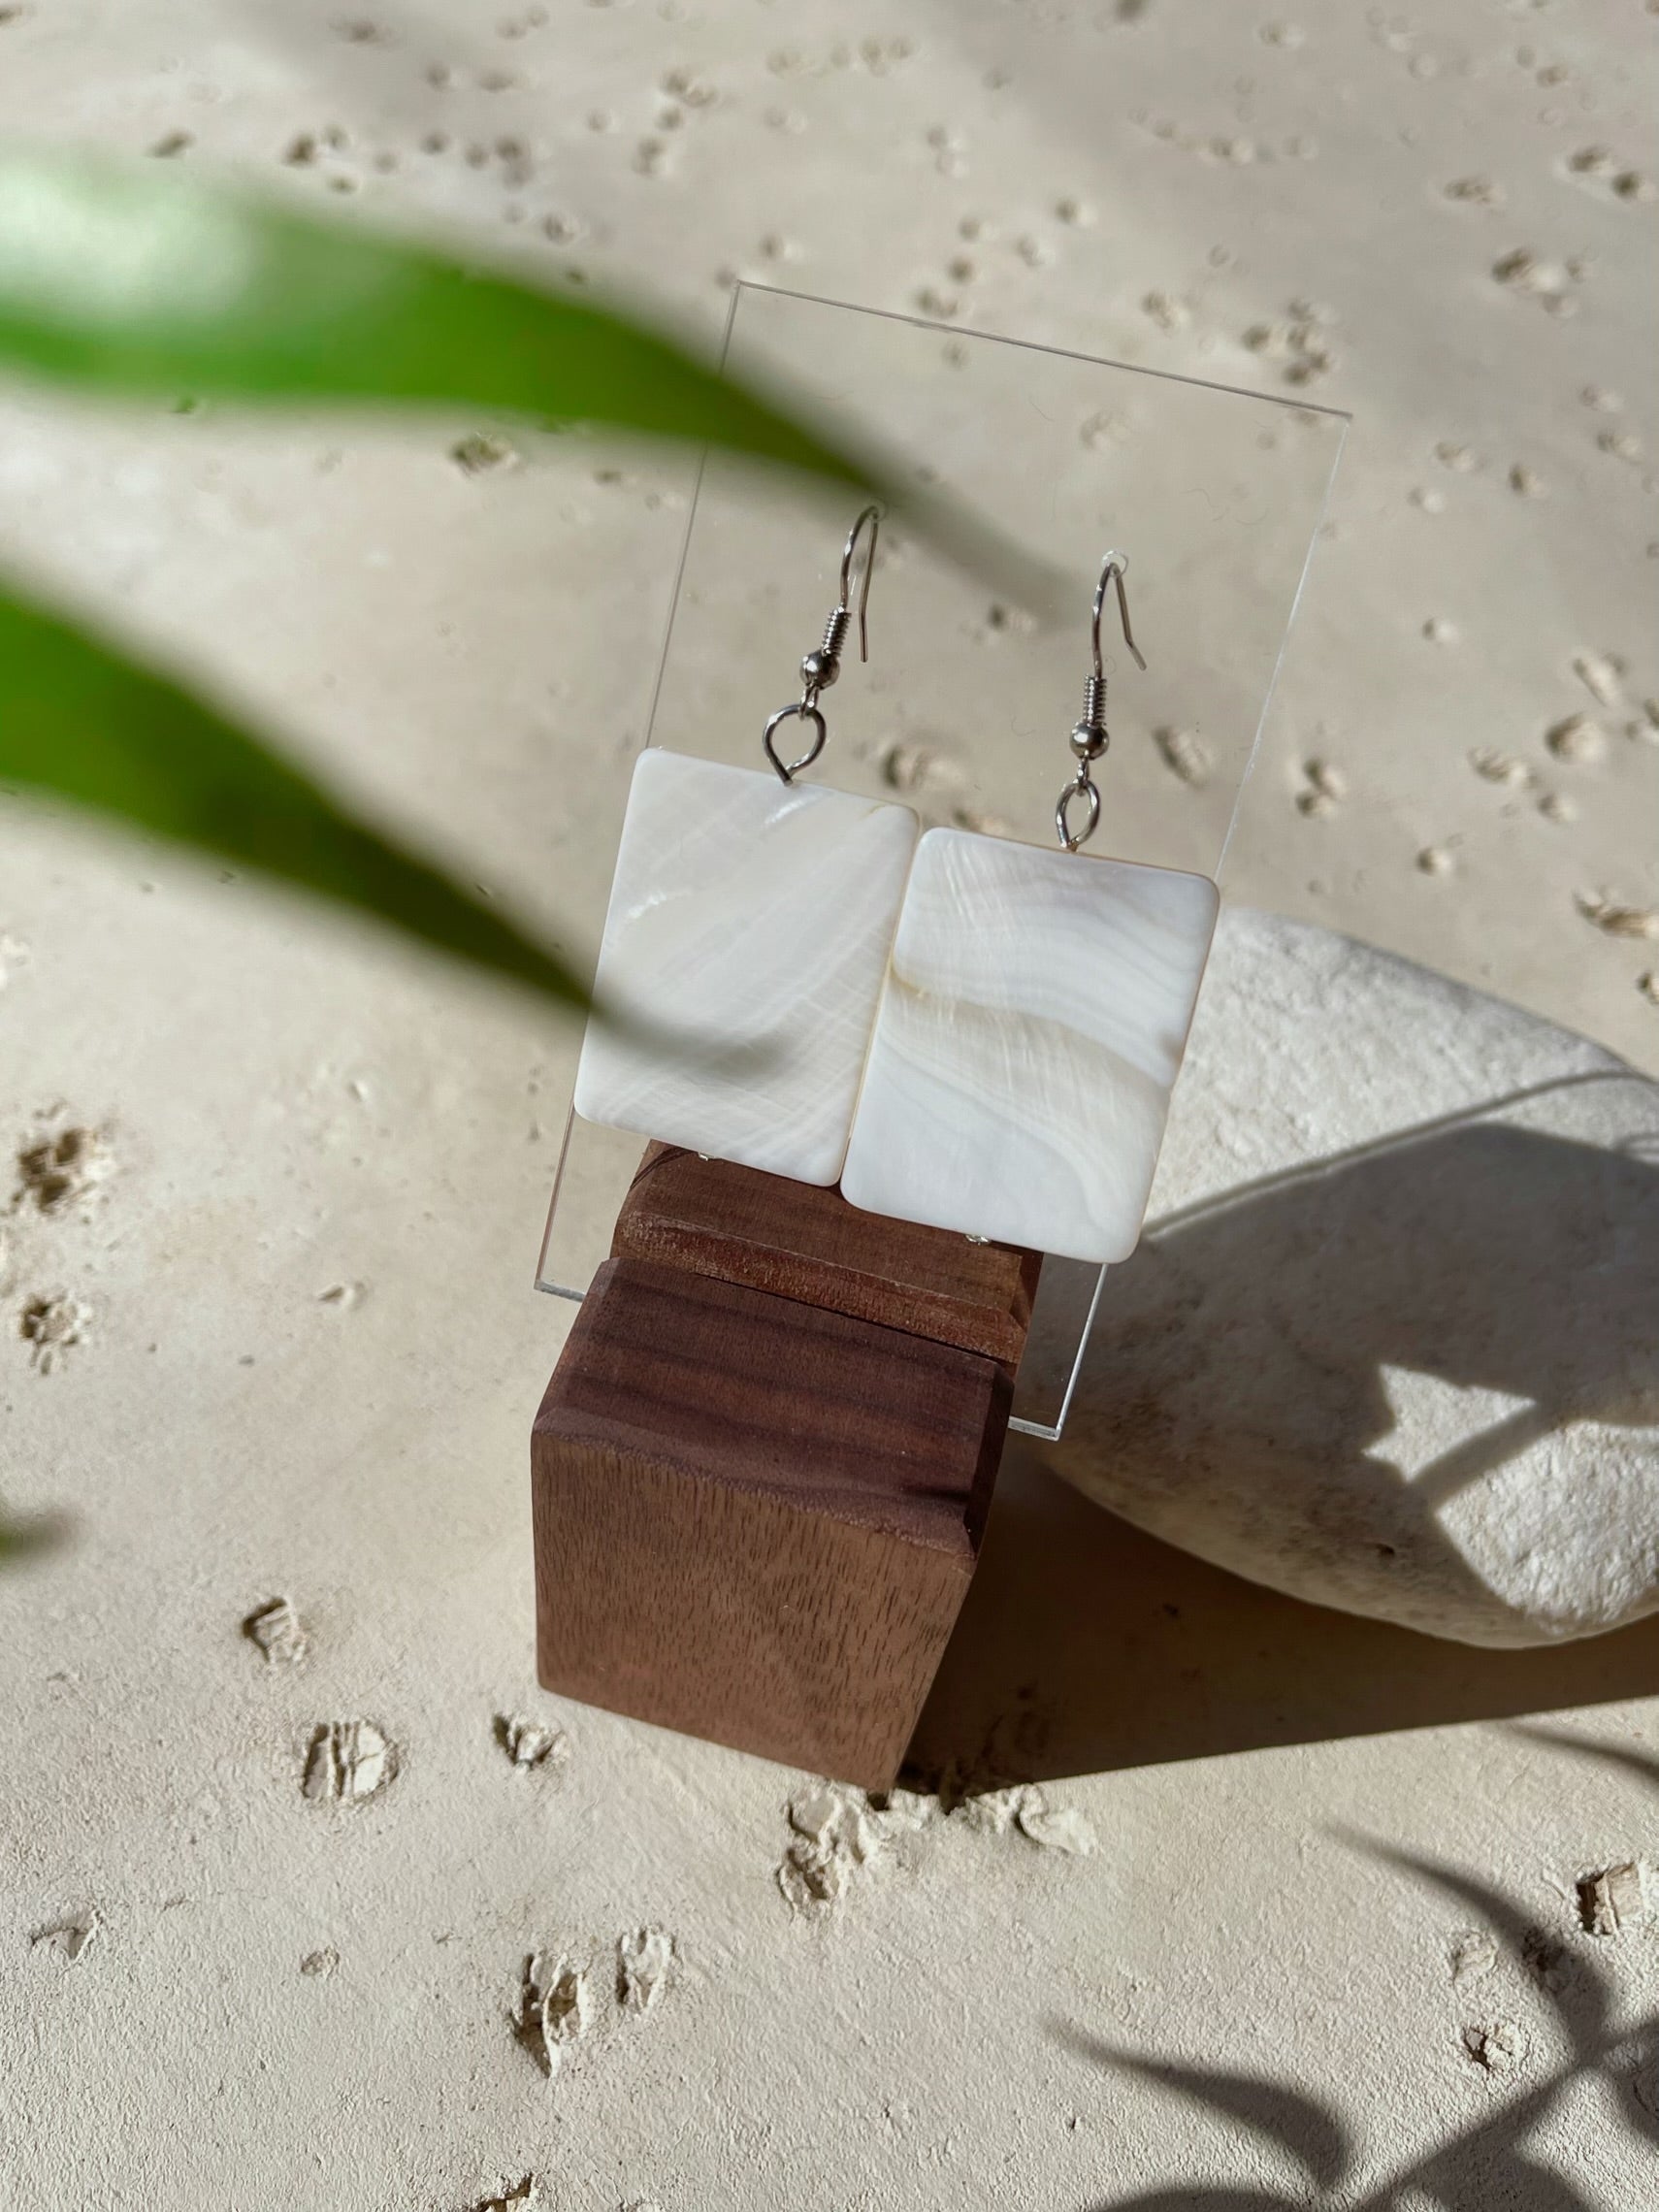 Nacre, Mother of pearl handcrafted Earrings